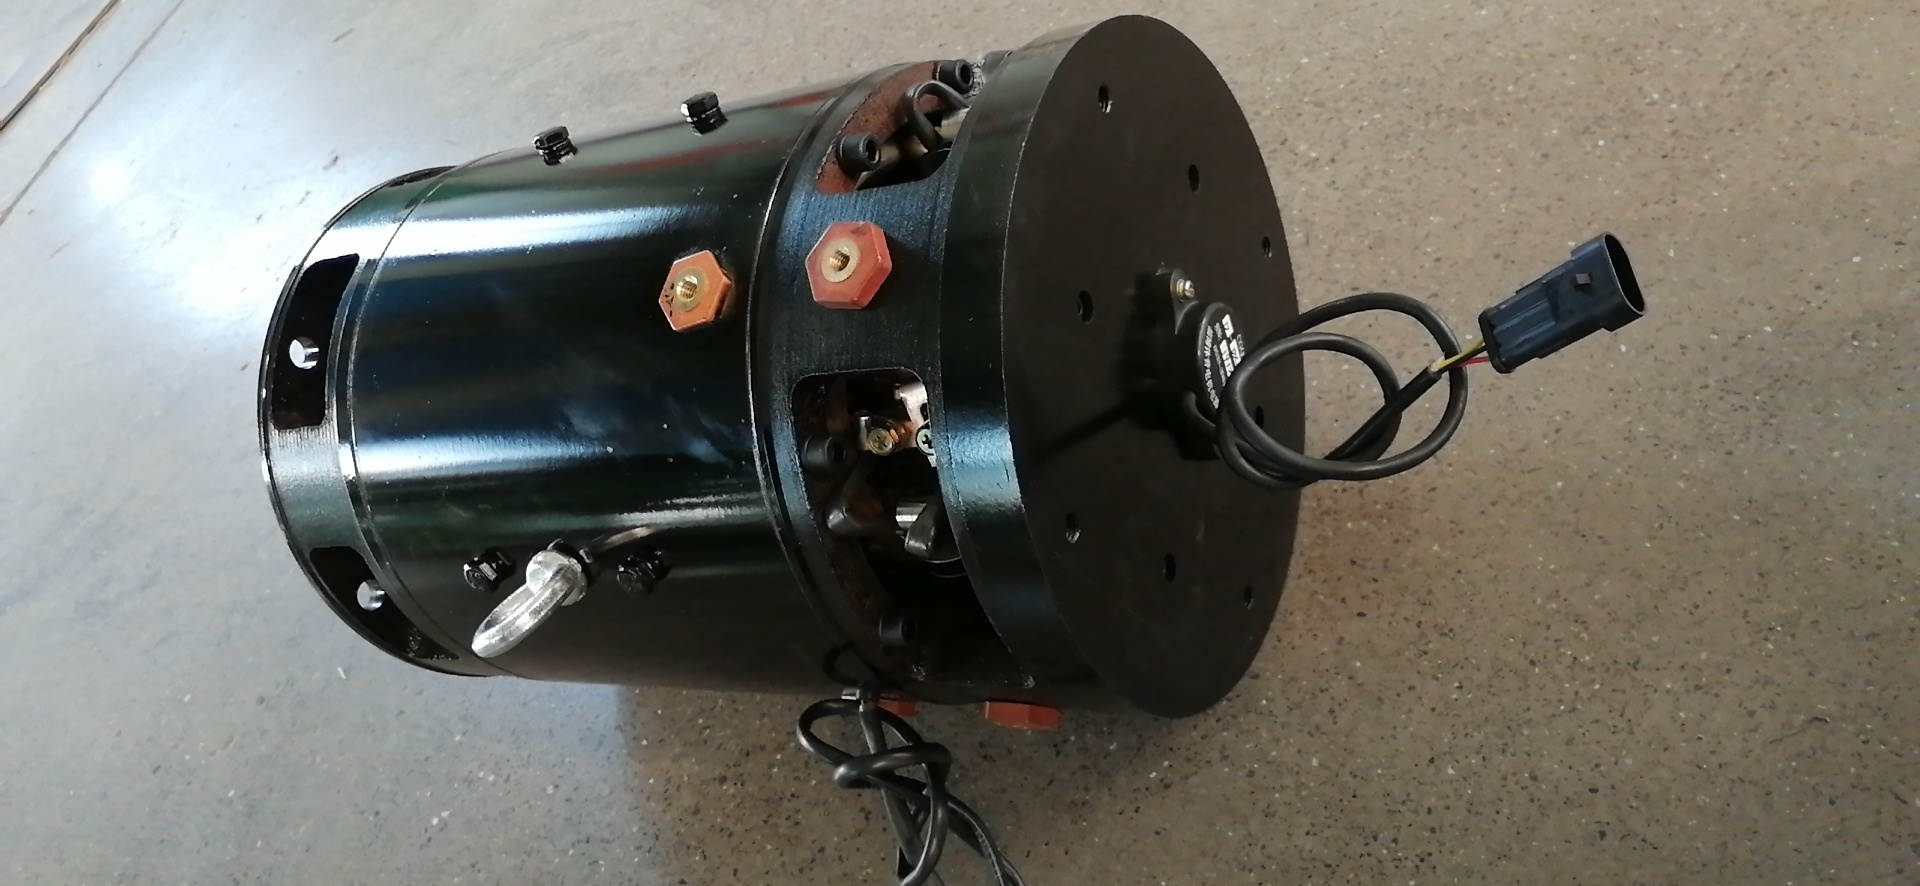 6.3KW72V1500rpm Series DC traction motor